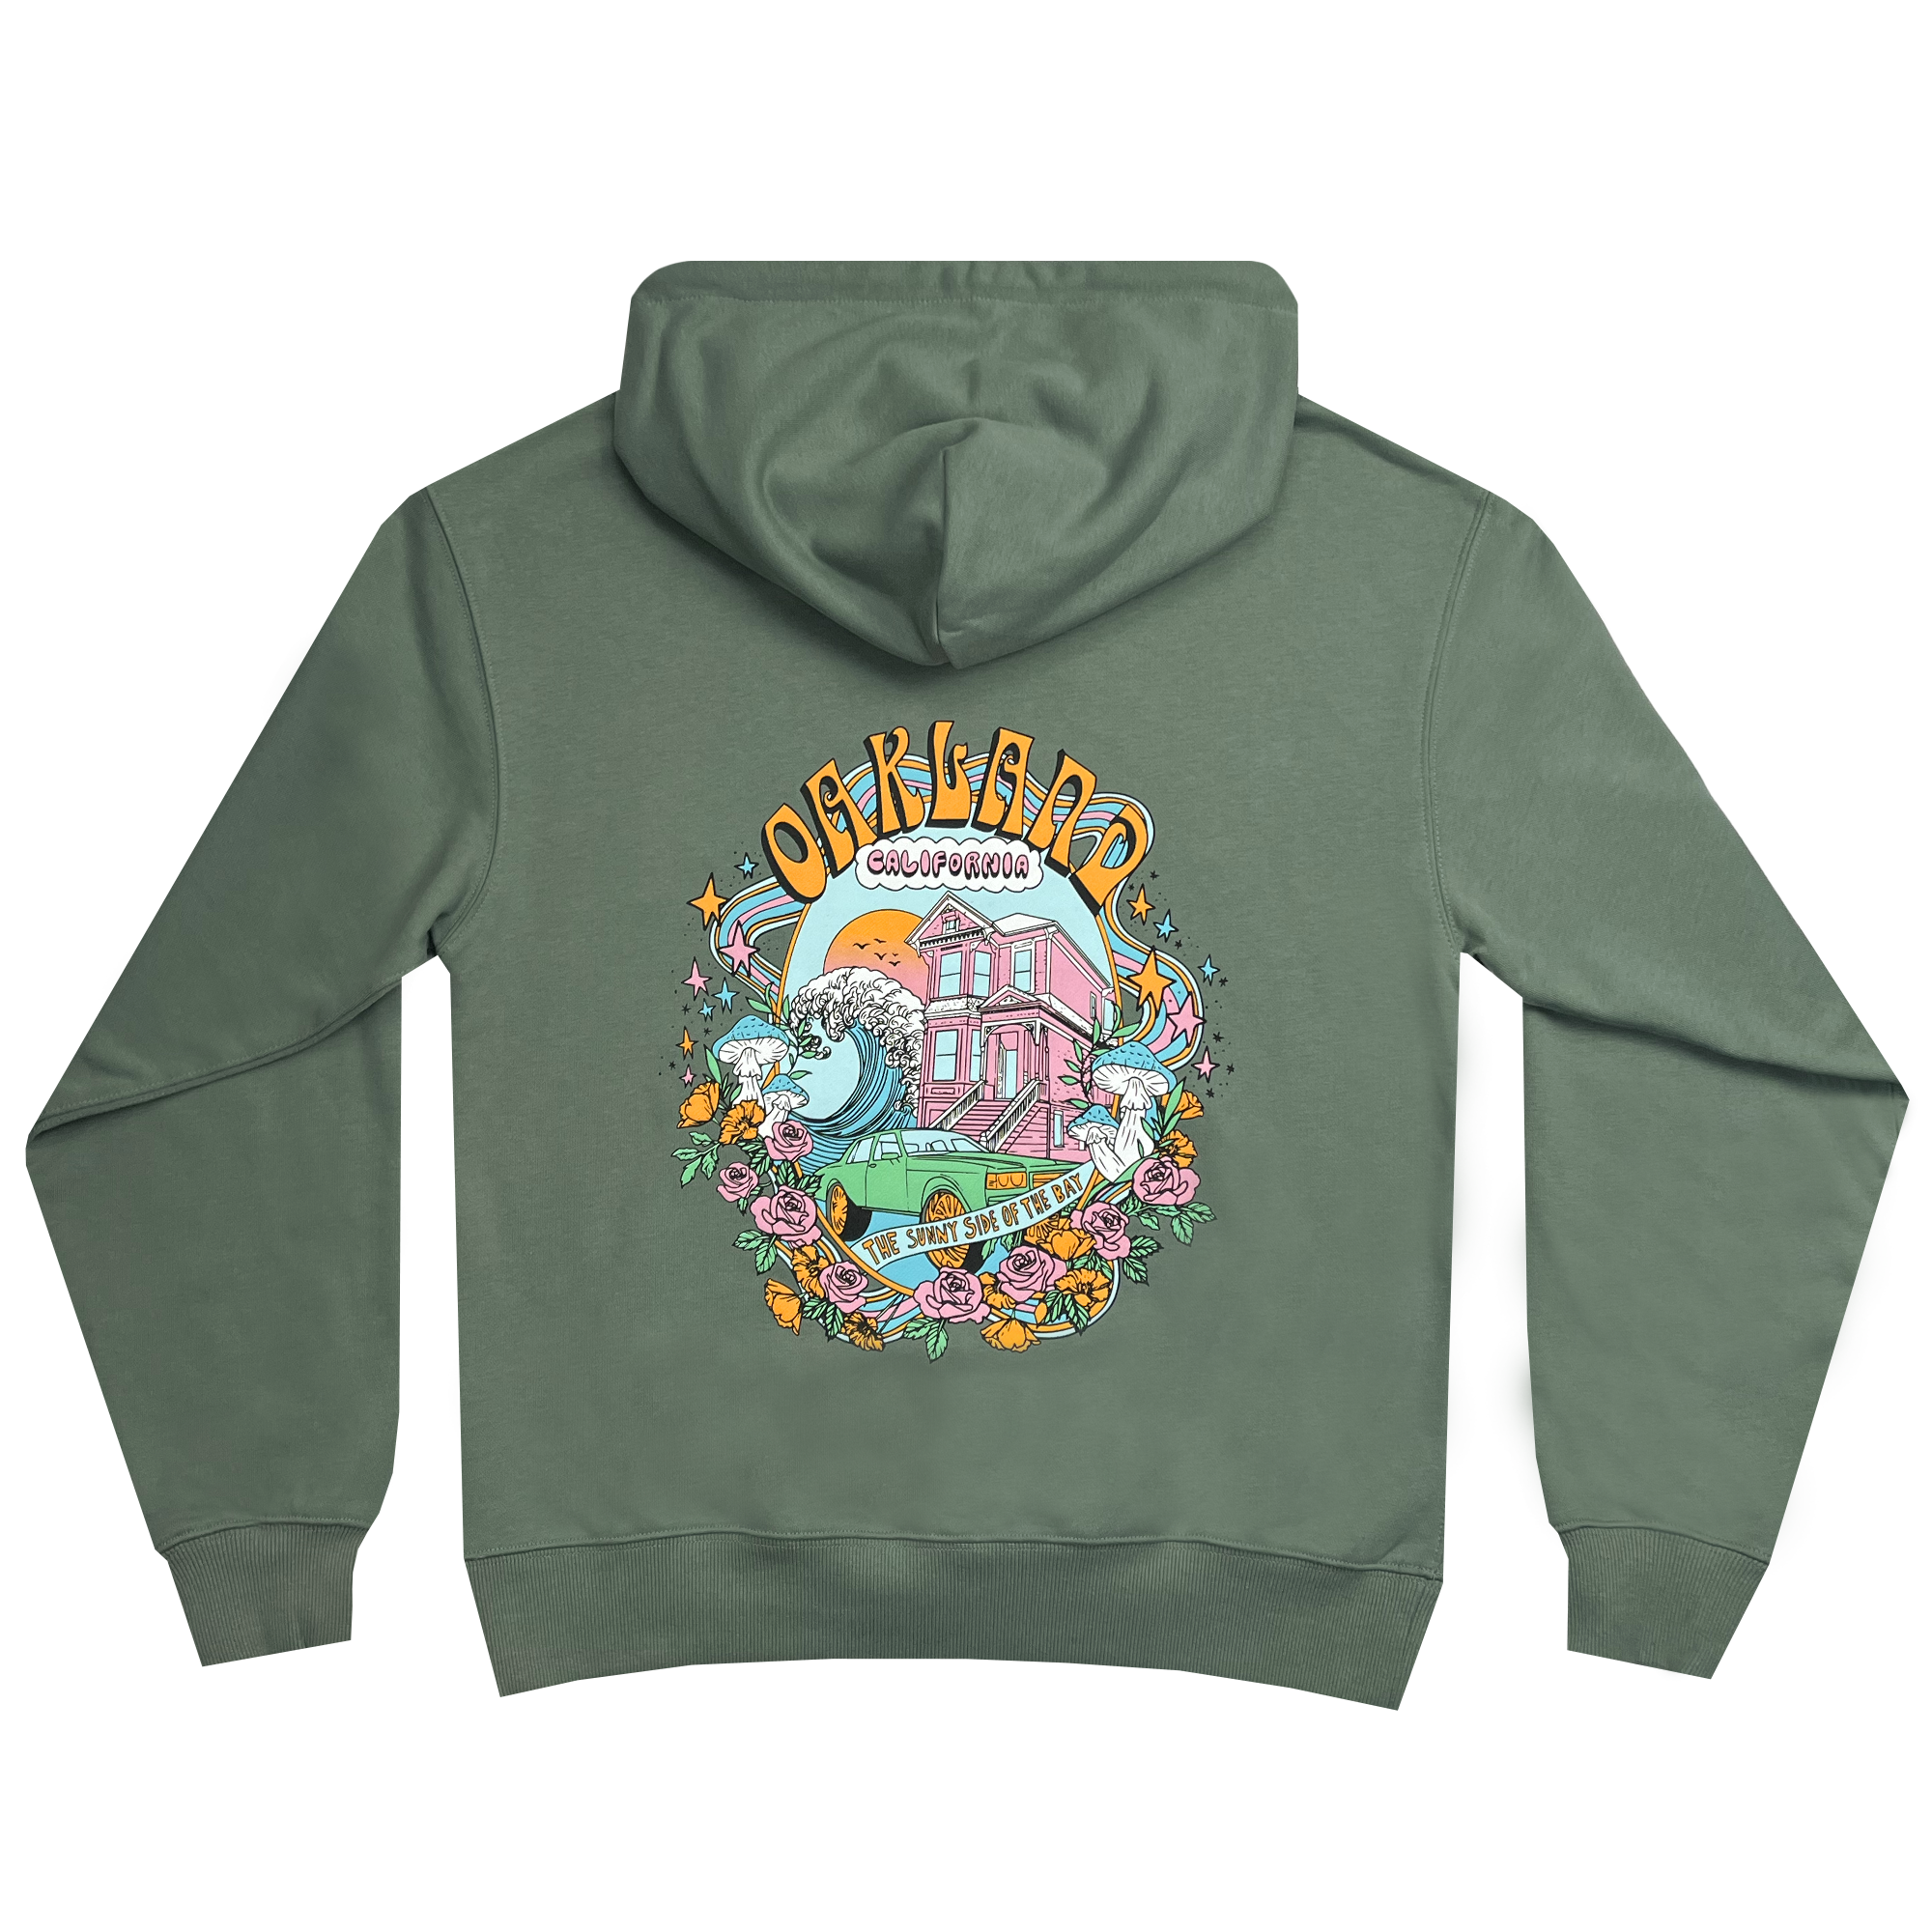 Back view of premium green hoodie with Oakland Dream design .